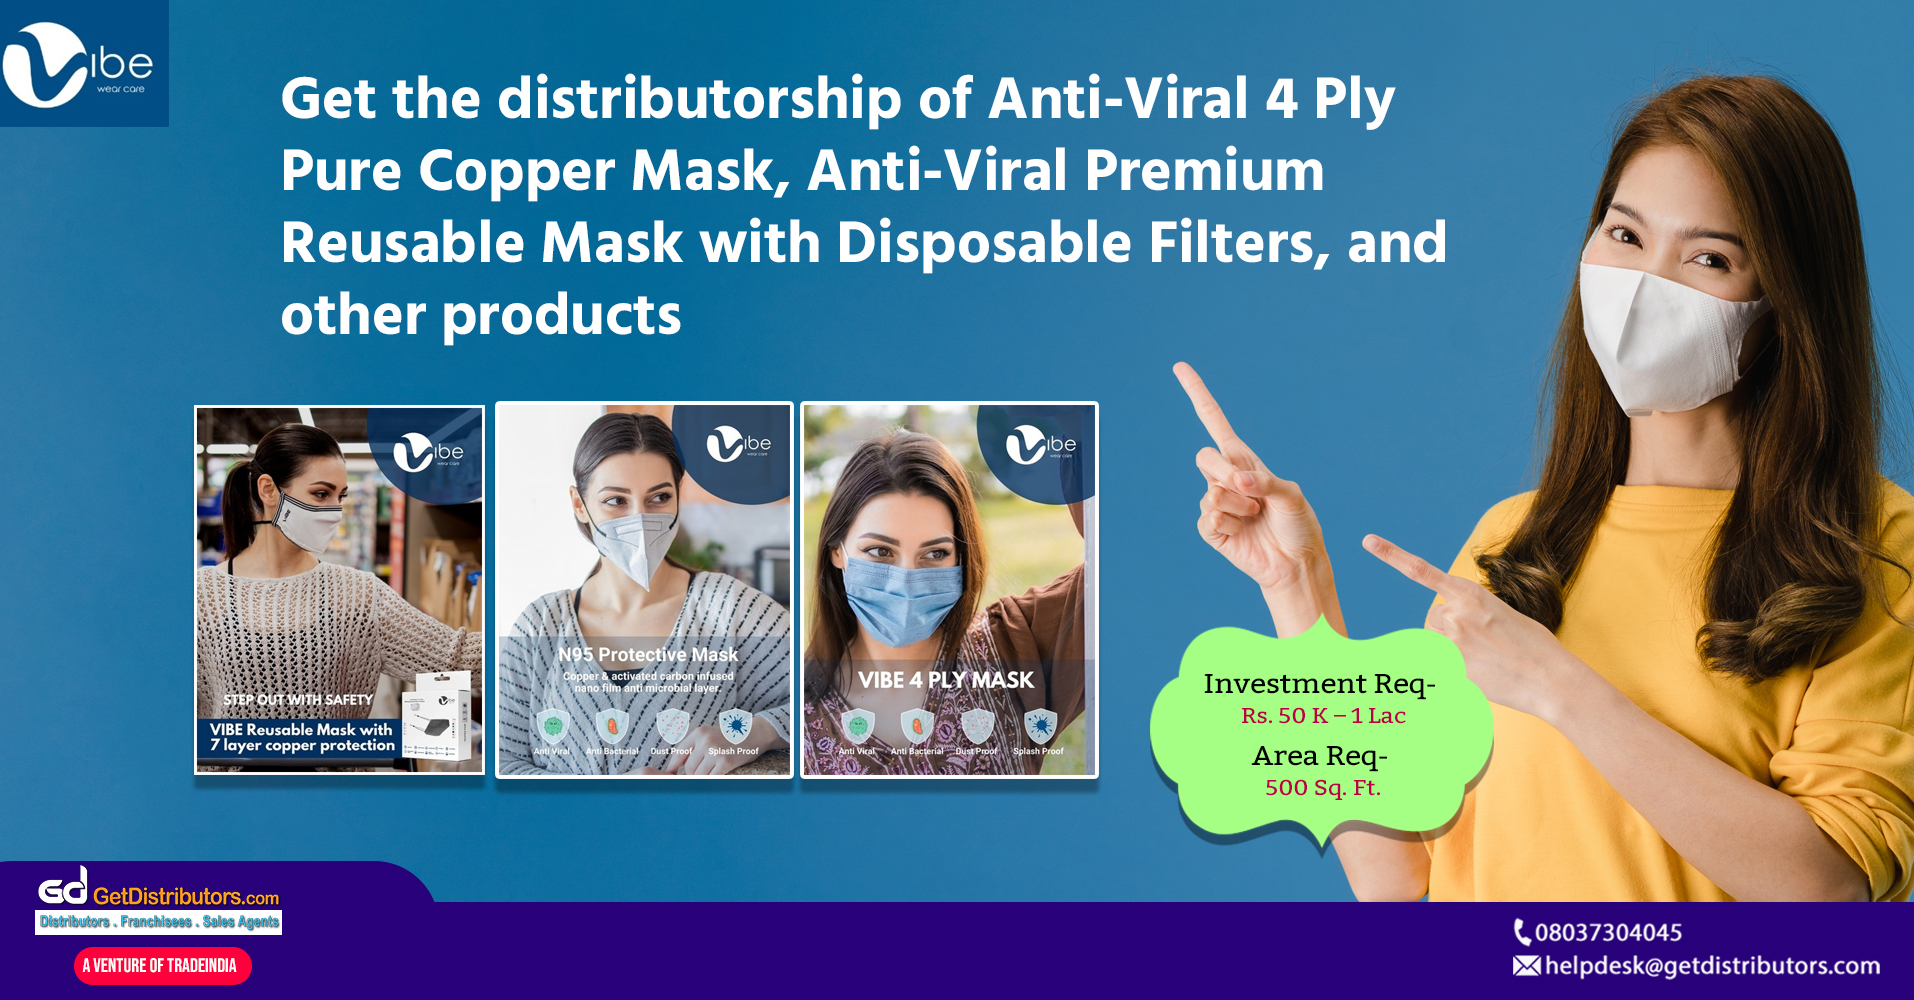 Distributorship of superior quality masks and other medical supplies